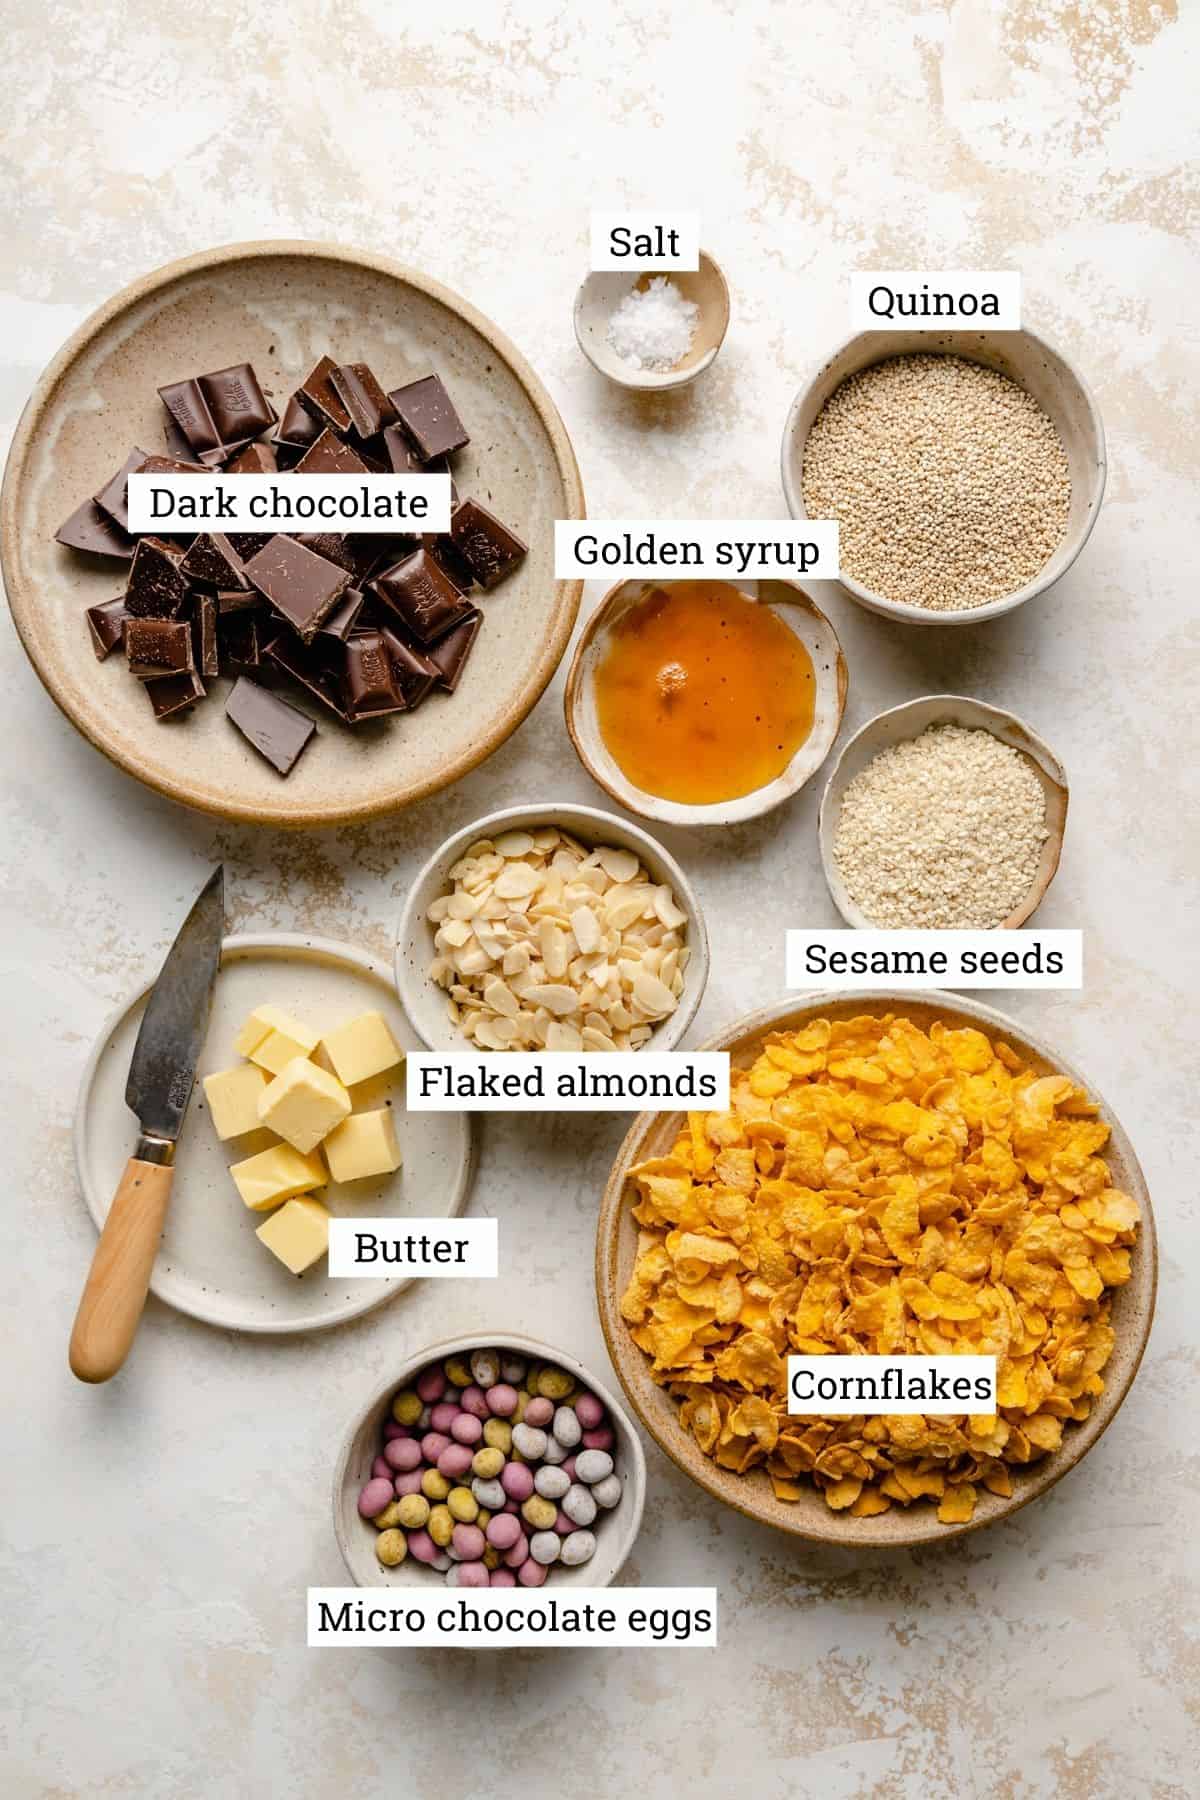 ingredients in various bowls for chocolate cornflake cakes on a plaster background.